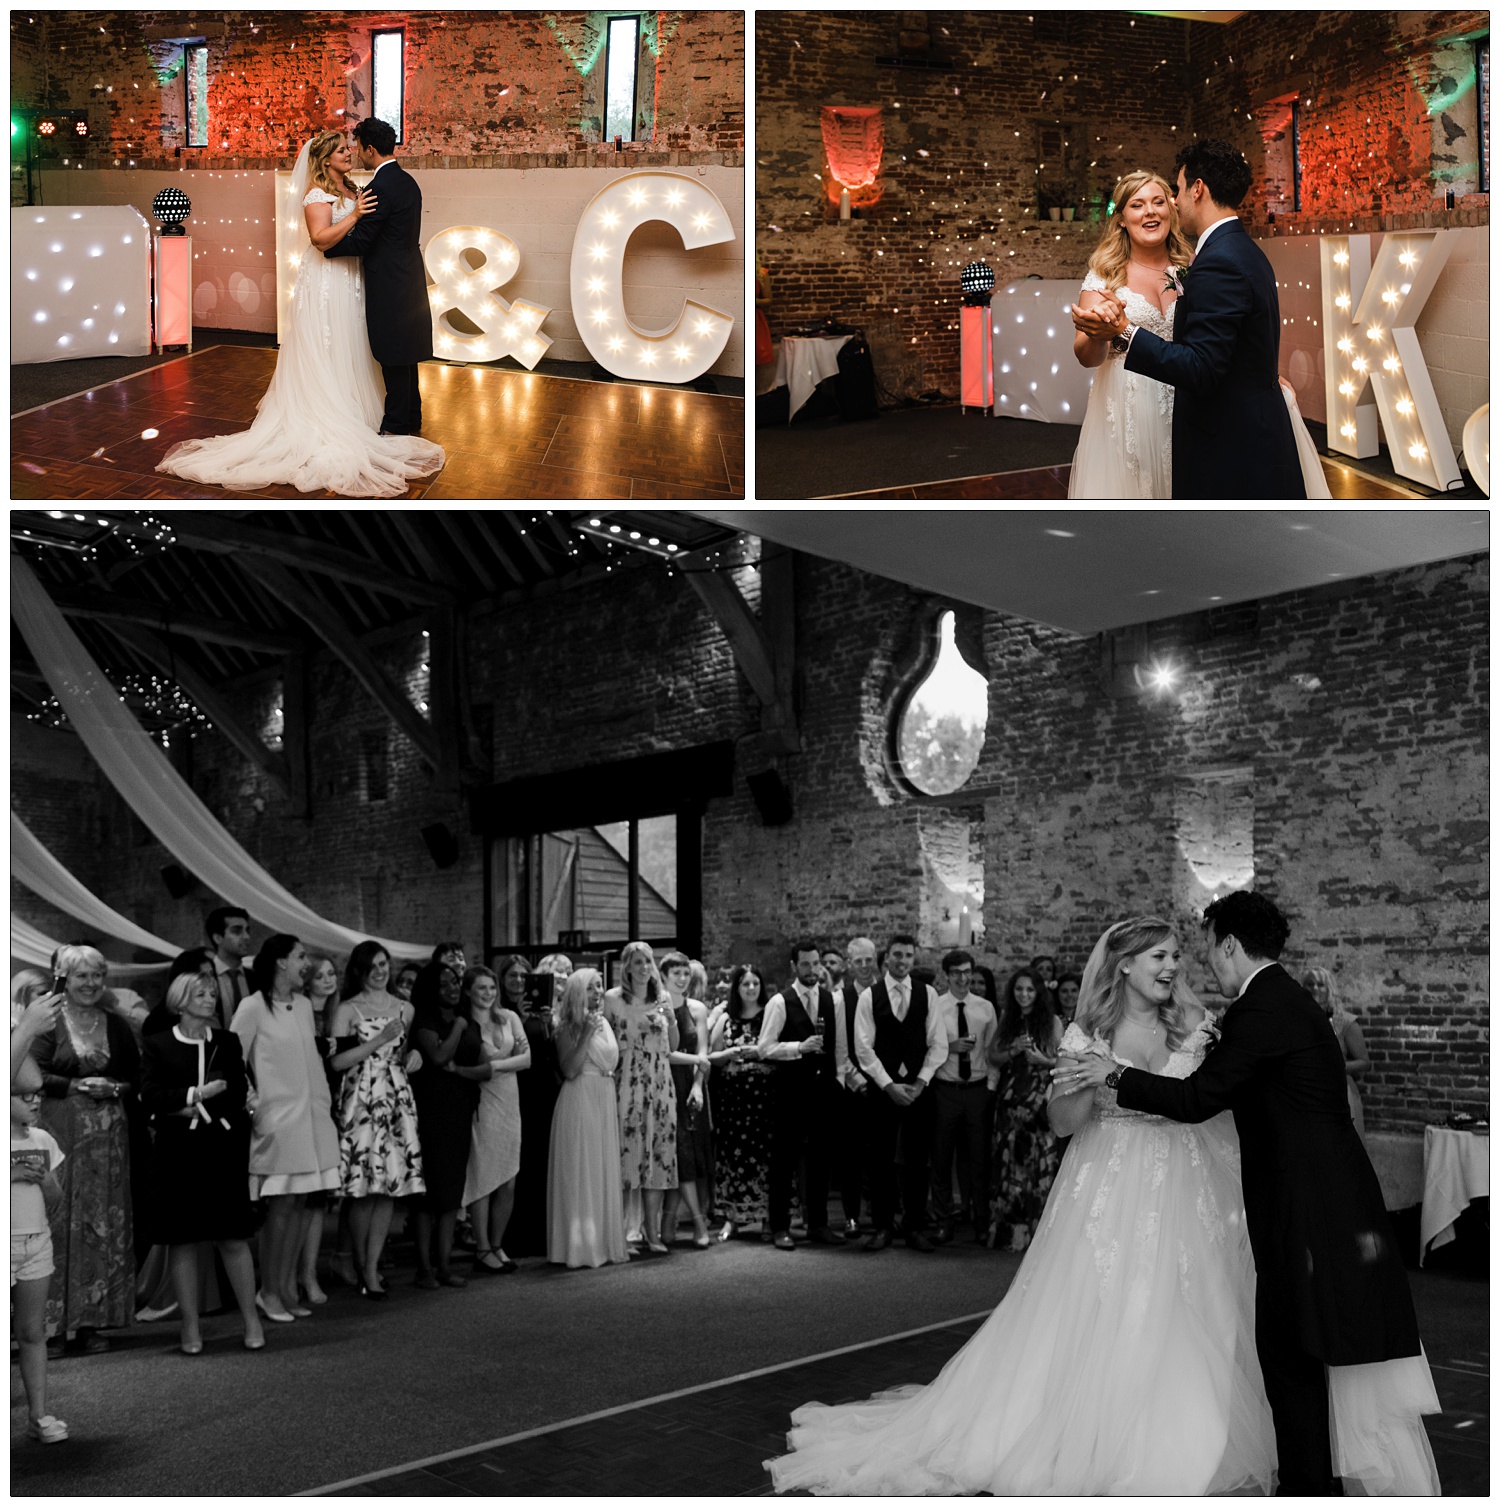 Bride and groom having their first dance in a barn venue near Braintree. Their friends and family watch.